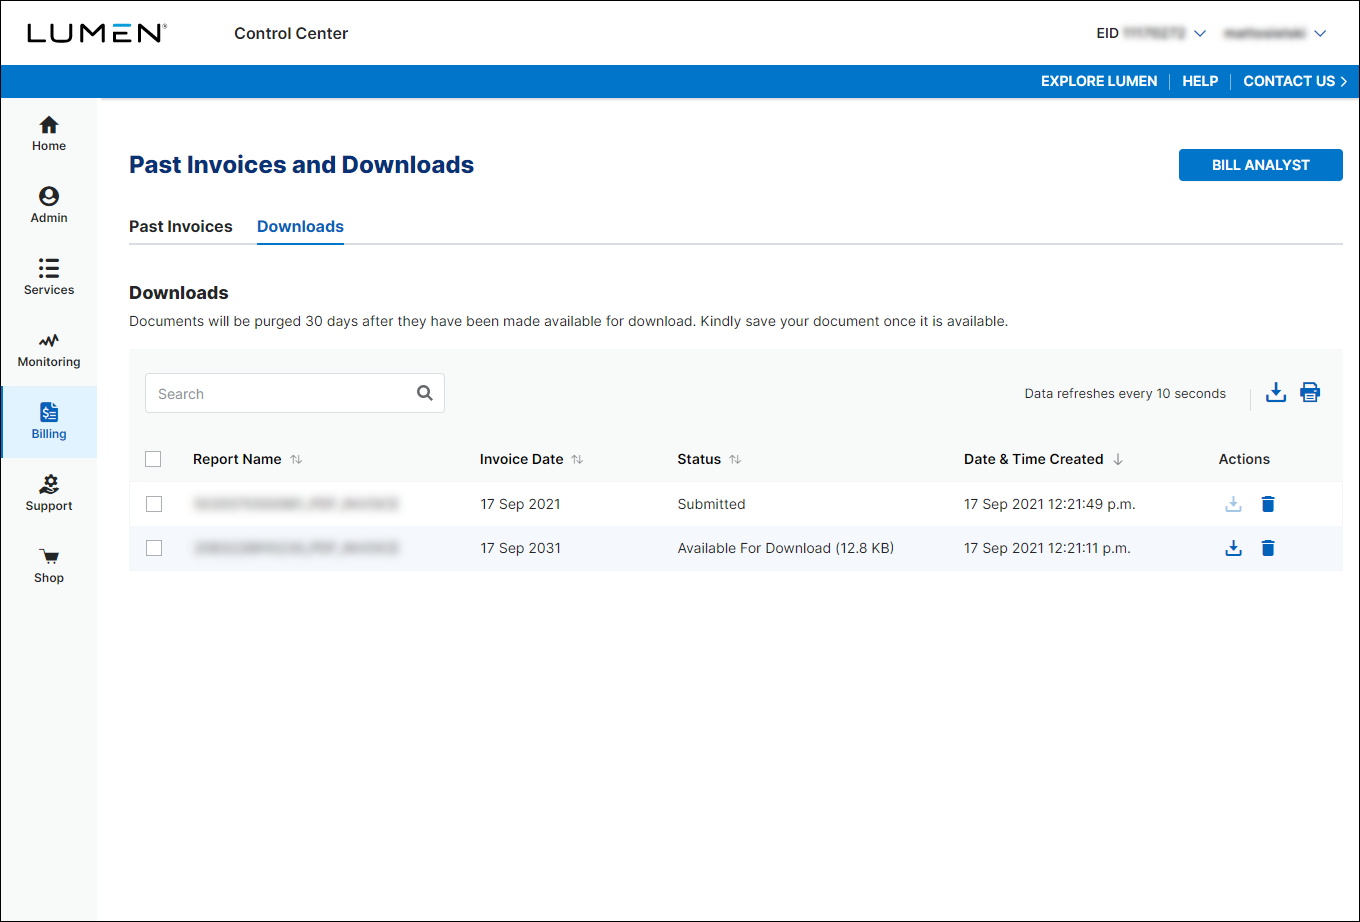 Past Invoices & Downloads (showing Downloads tab)